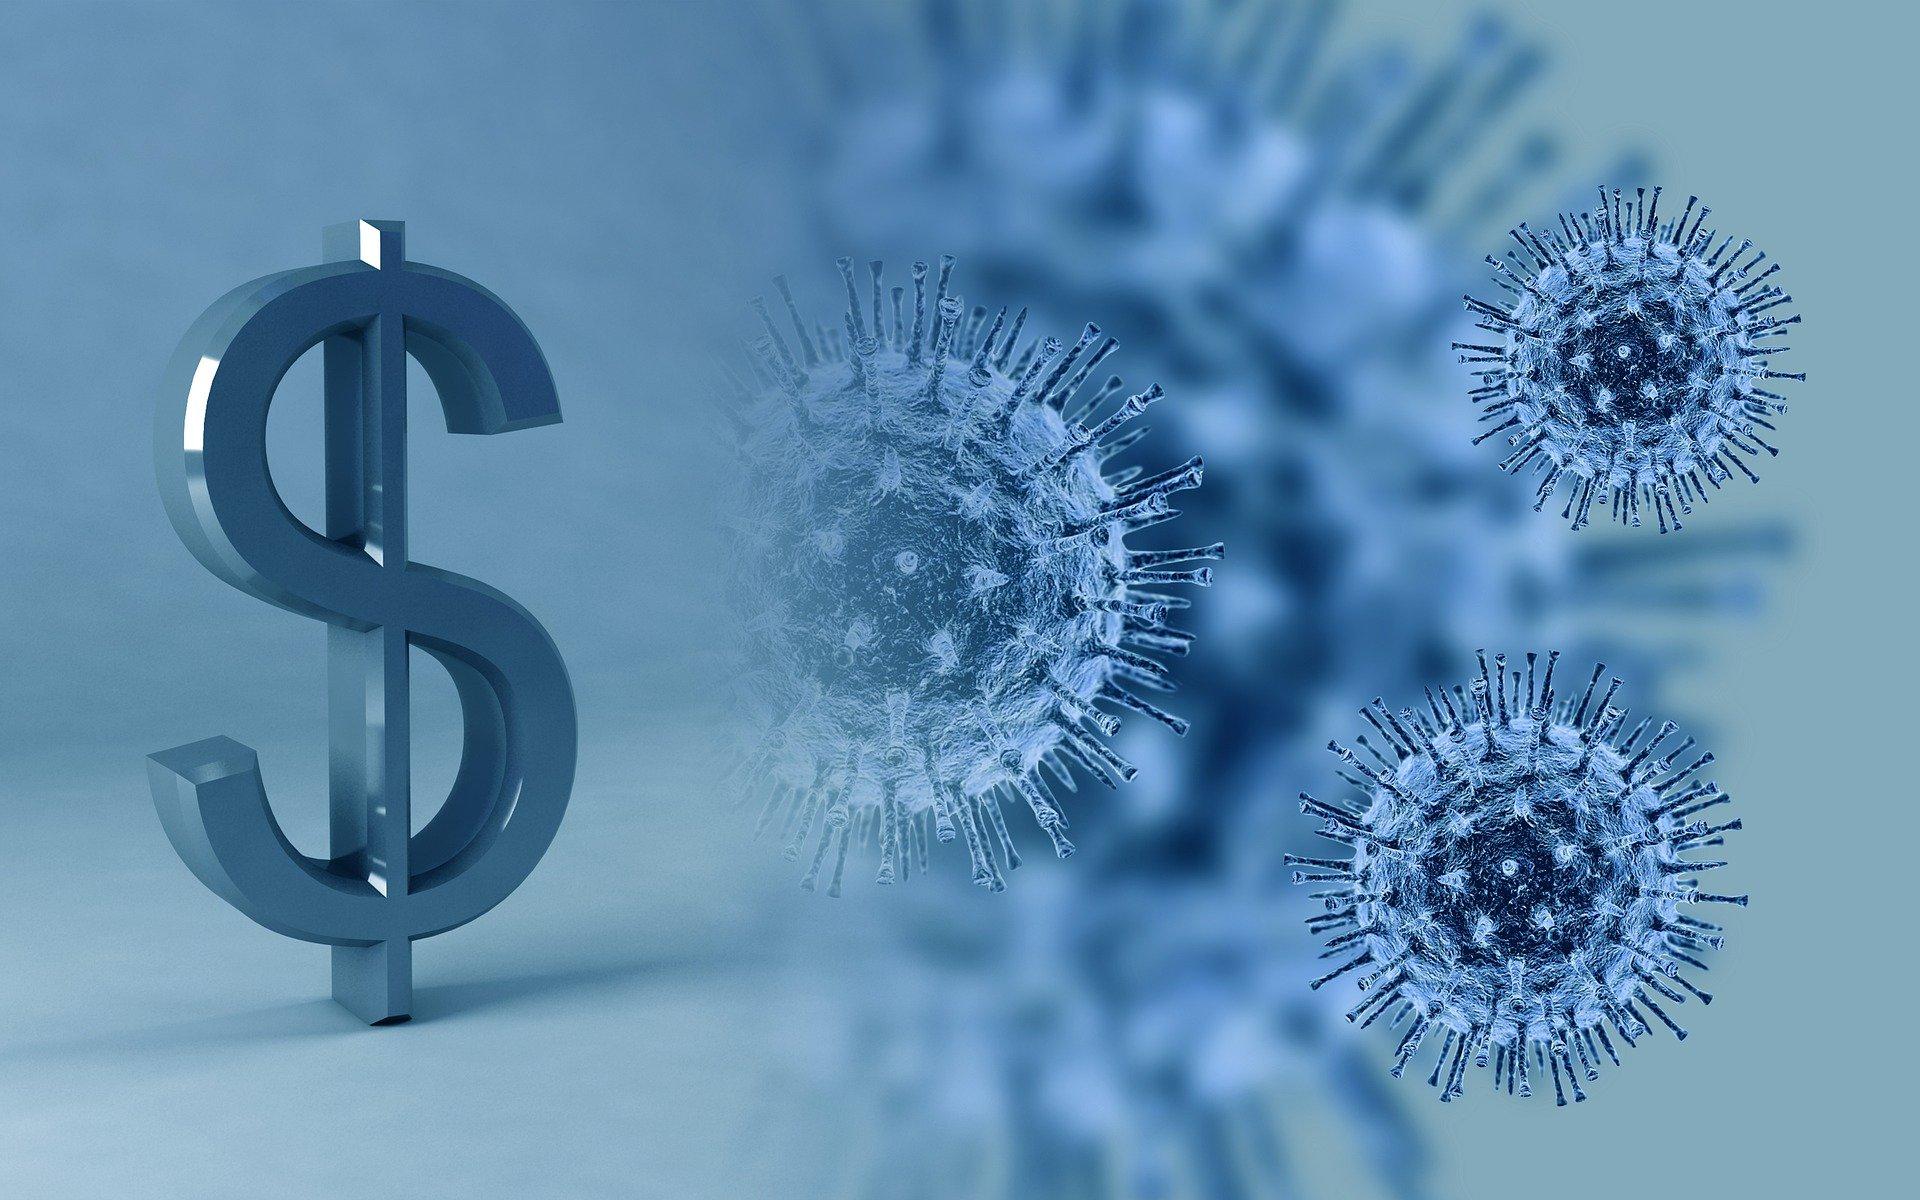 COVID-19 virus and a dollar sign.